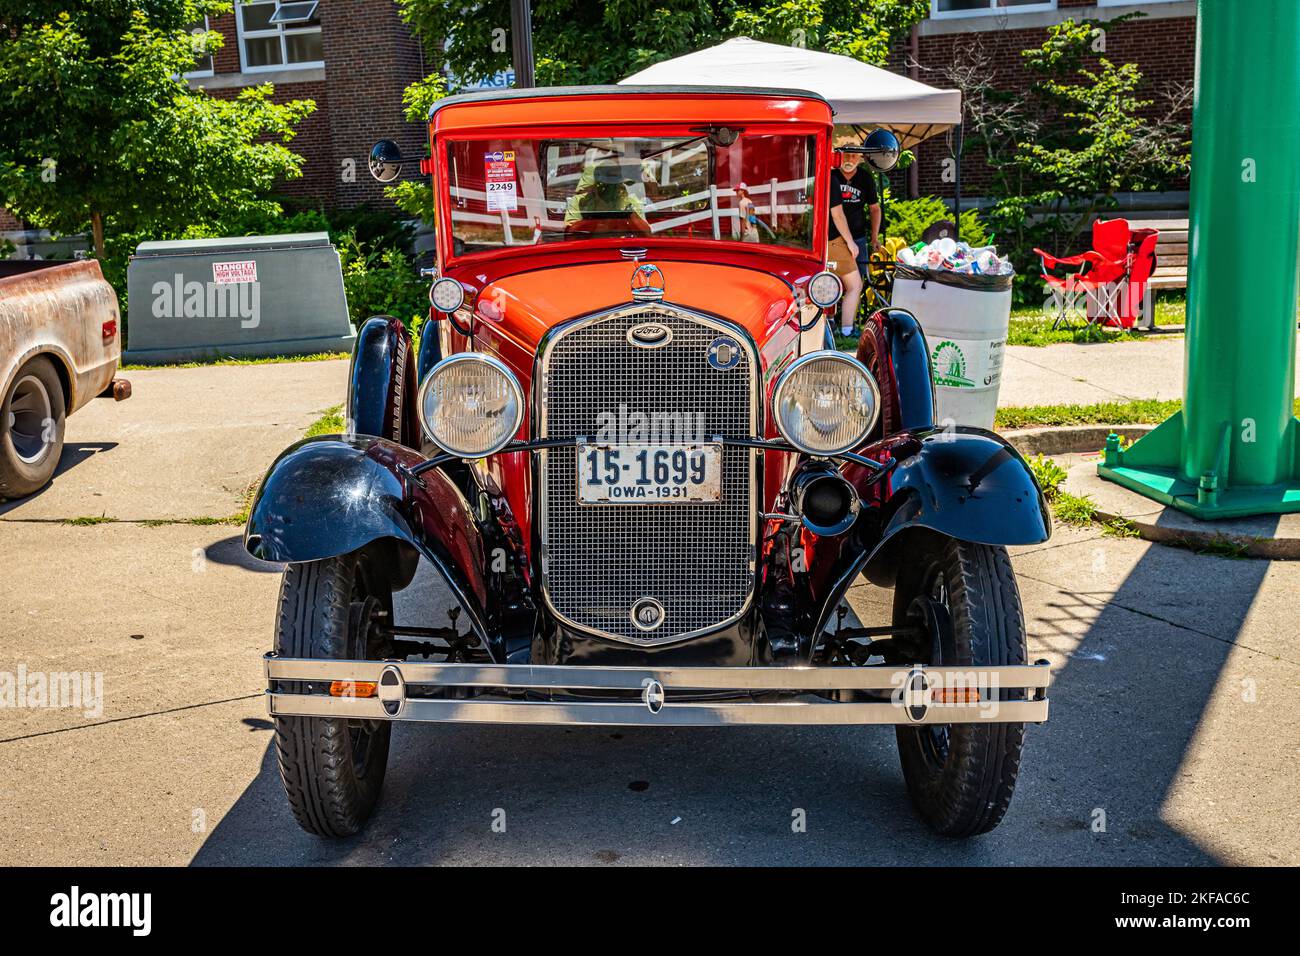 Des Moines, IA - July 02, 2022: High perspective front view of a 1931 Ford Model A Pickup Truck at a local car show. Stock Photo